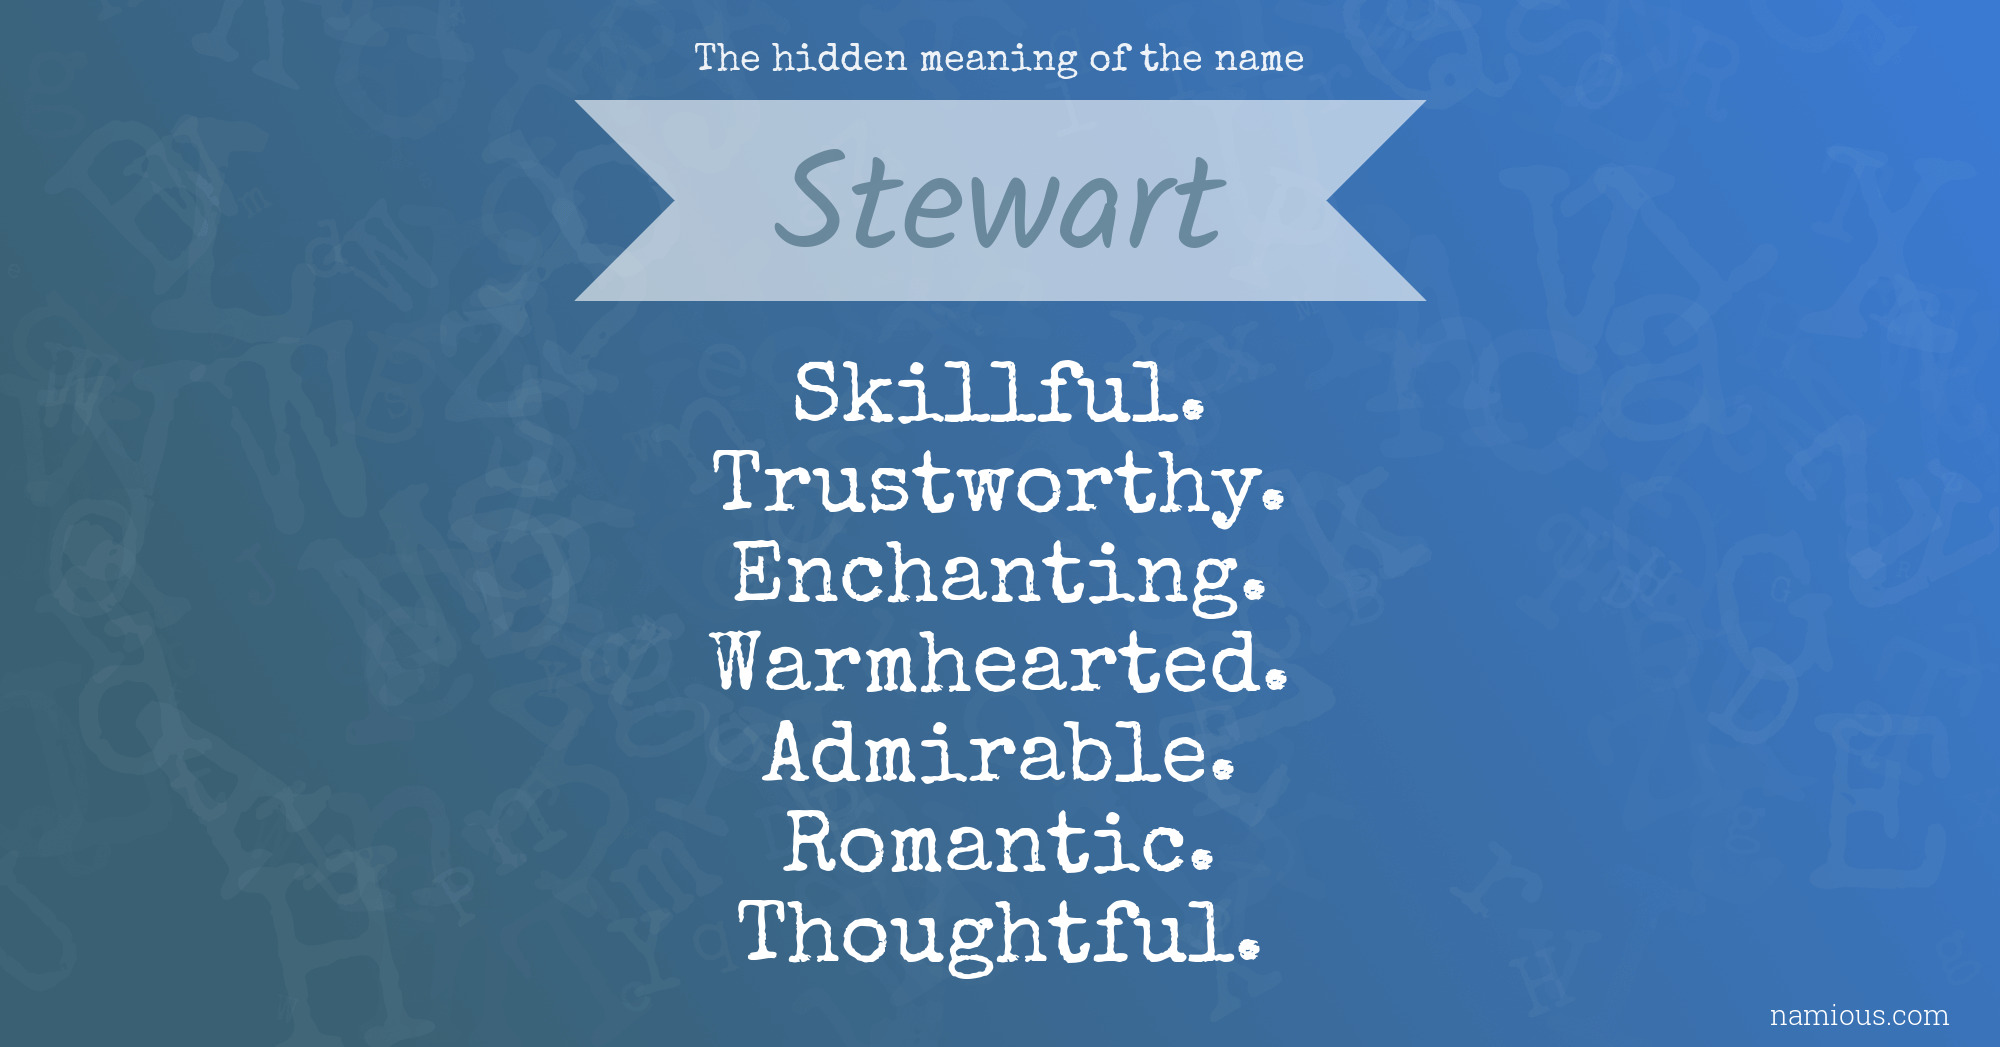 The hidden meaning of the name Stewart